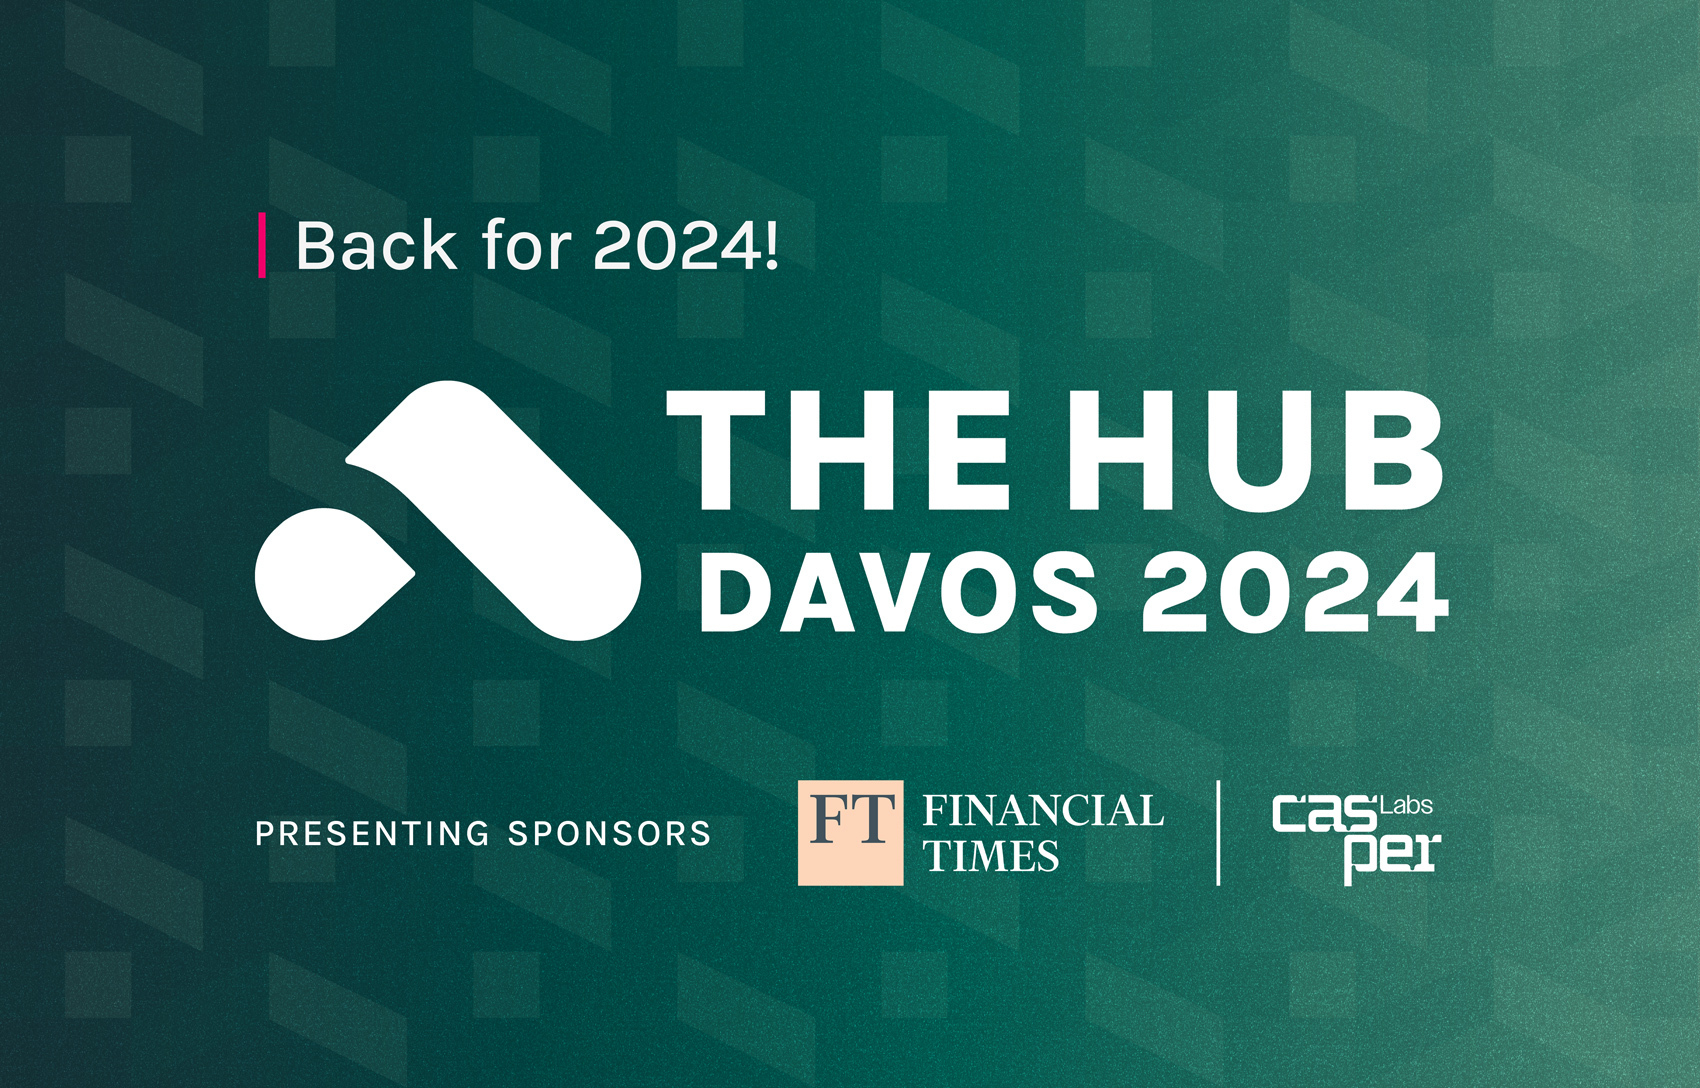 The Hub at Davos is Back! | Casper Labs